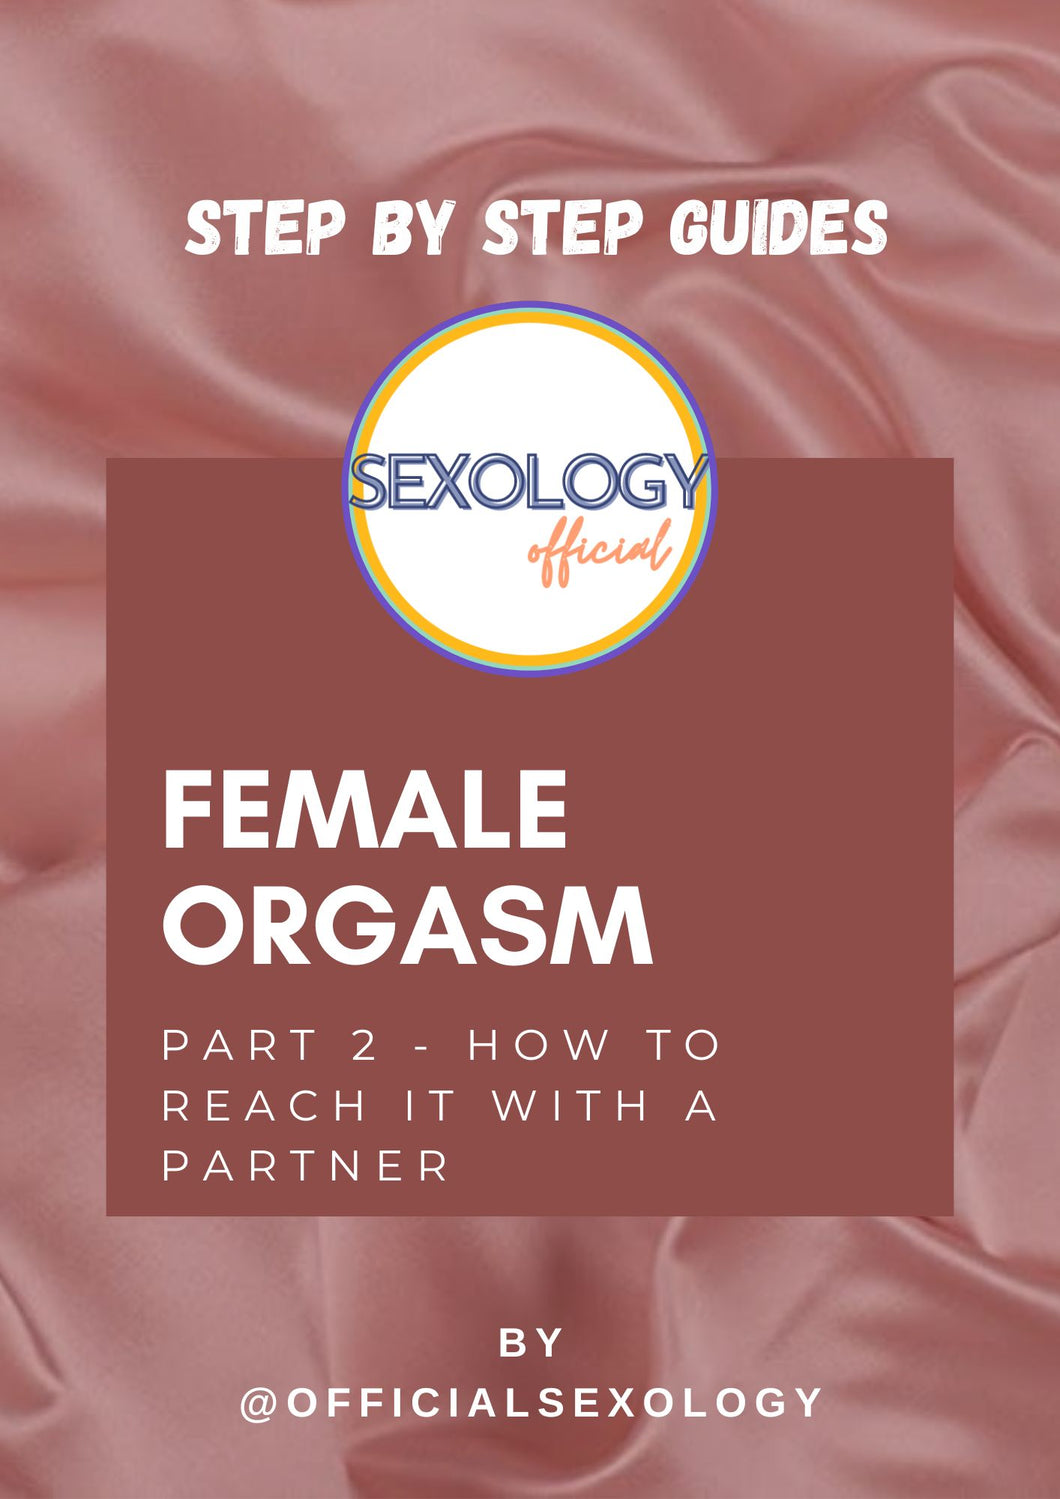 Female Orgasm - Part 2: How to reach it with a partner